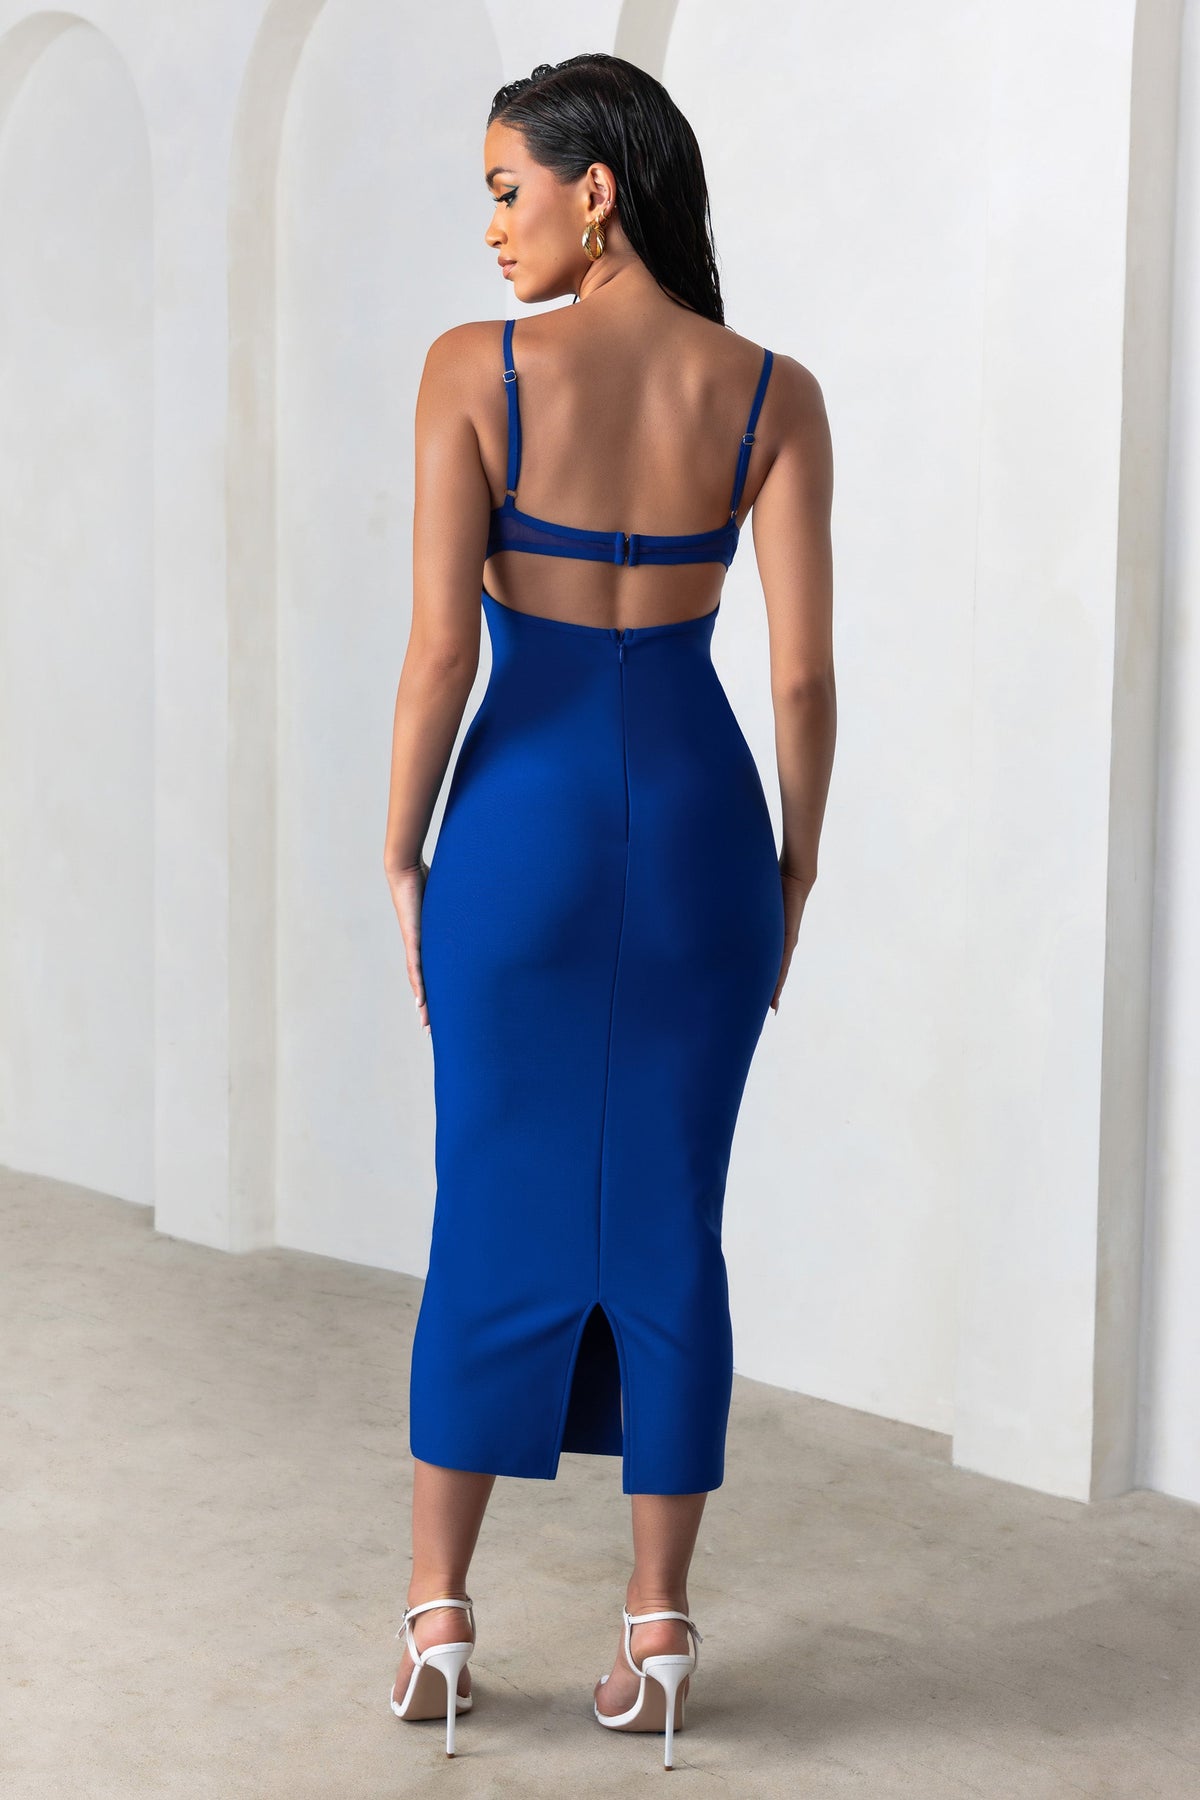 Destiny Calling Electric Blue Bandage Mesh Cut Out Midi Dress with